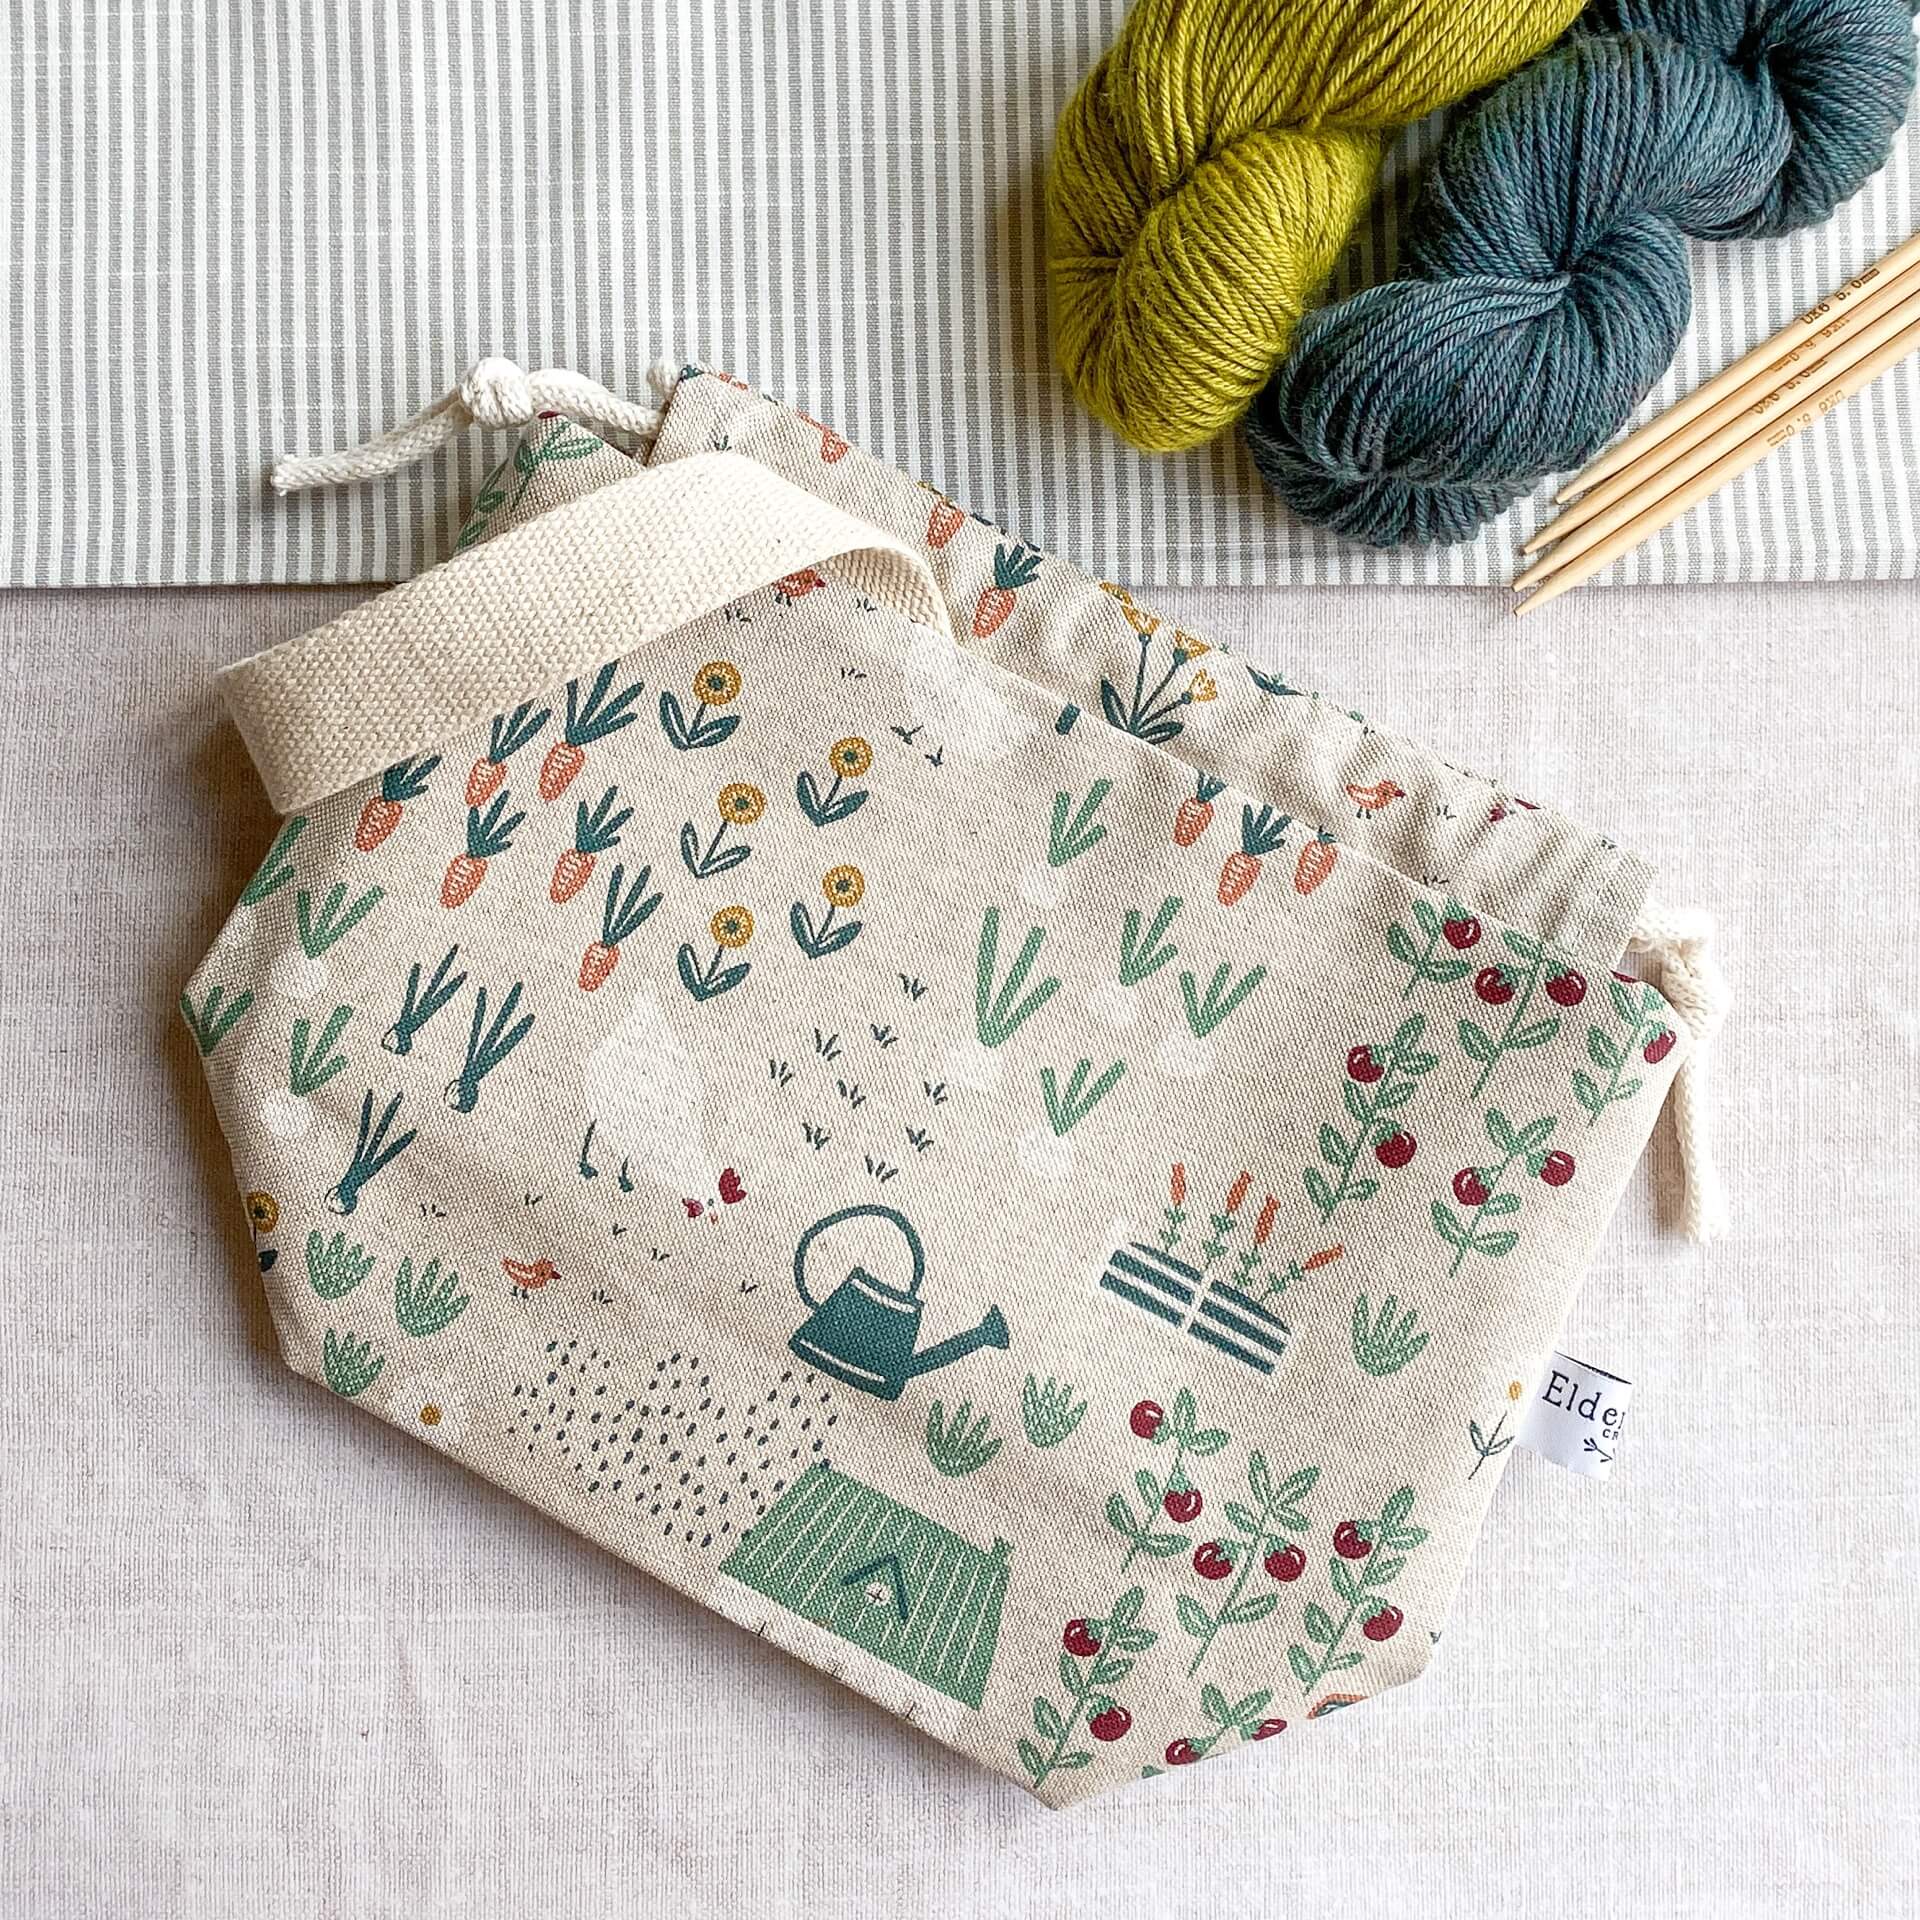 Notions pouch for knitting and crochet – Eldenwood Craft